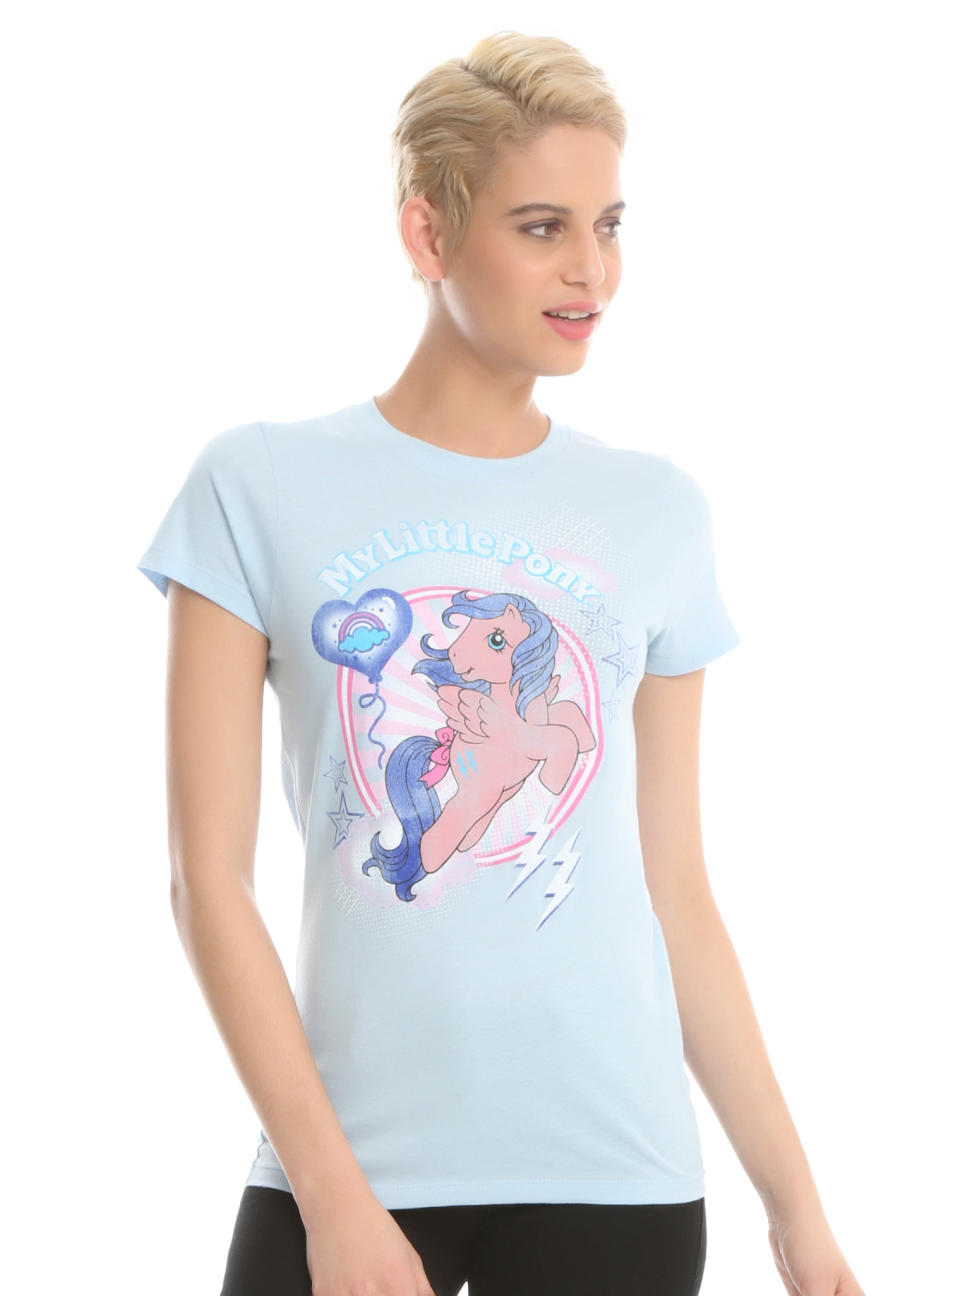 This My Little Pony shirt, sold online at Hot Topic, costs $22.90, a fraction of the price of the Moschino shirt. The difference? No “Moschino” label. (Photo: Hot Topic)